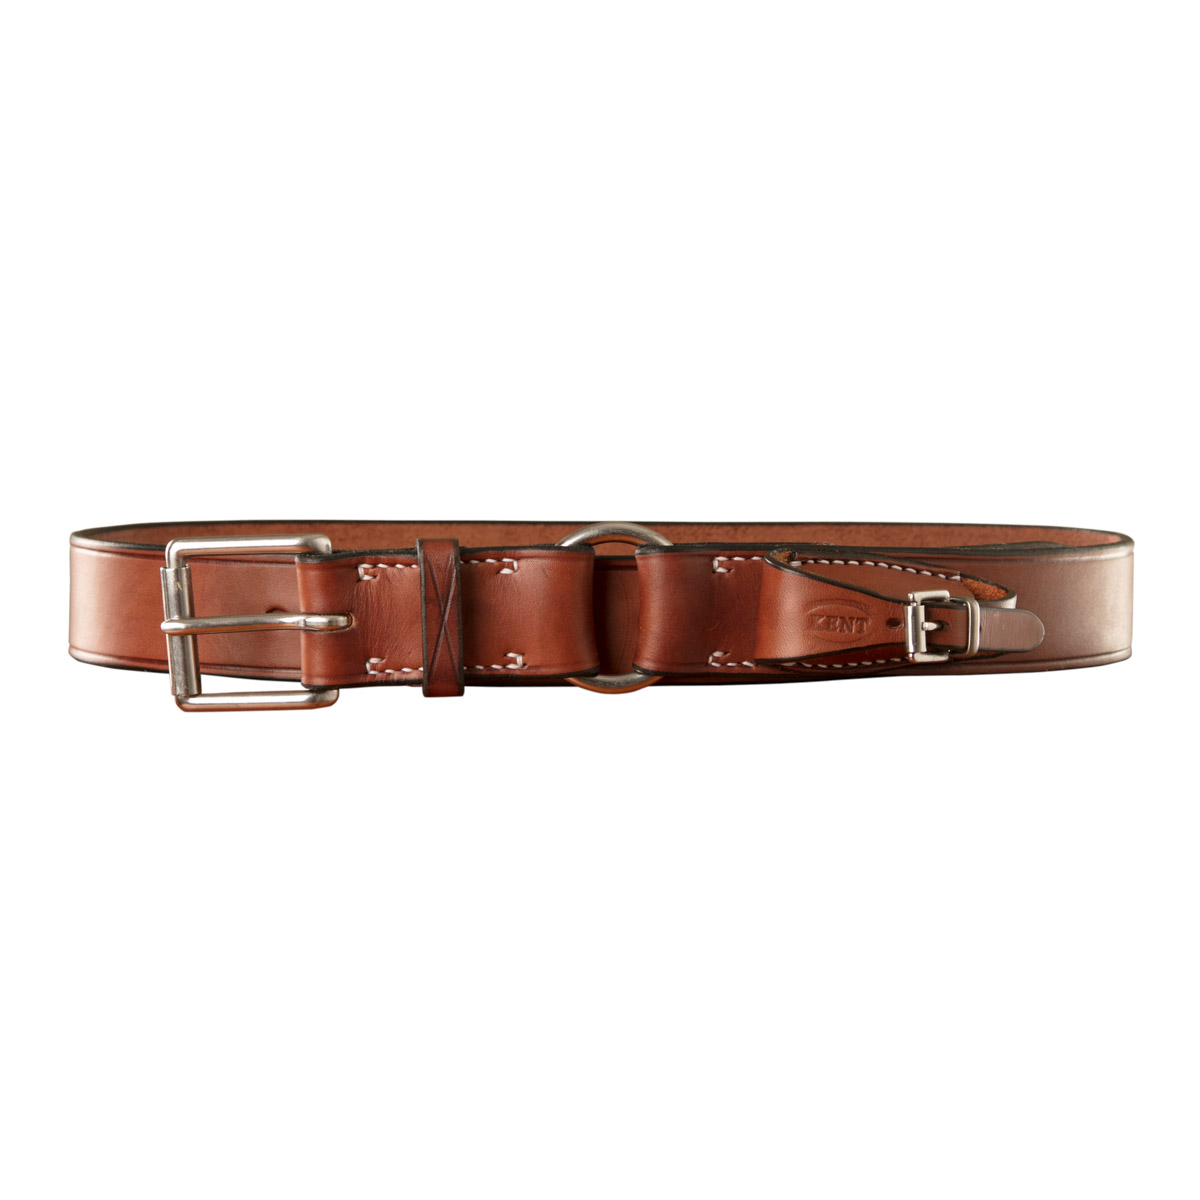 Stockmans Belt, Solid Leather, with Stainless Steel Roller Buckle, Ring and Pouch for Pocket Knife 1